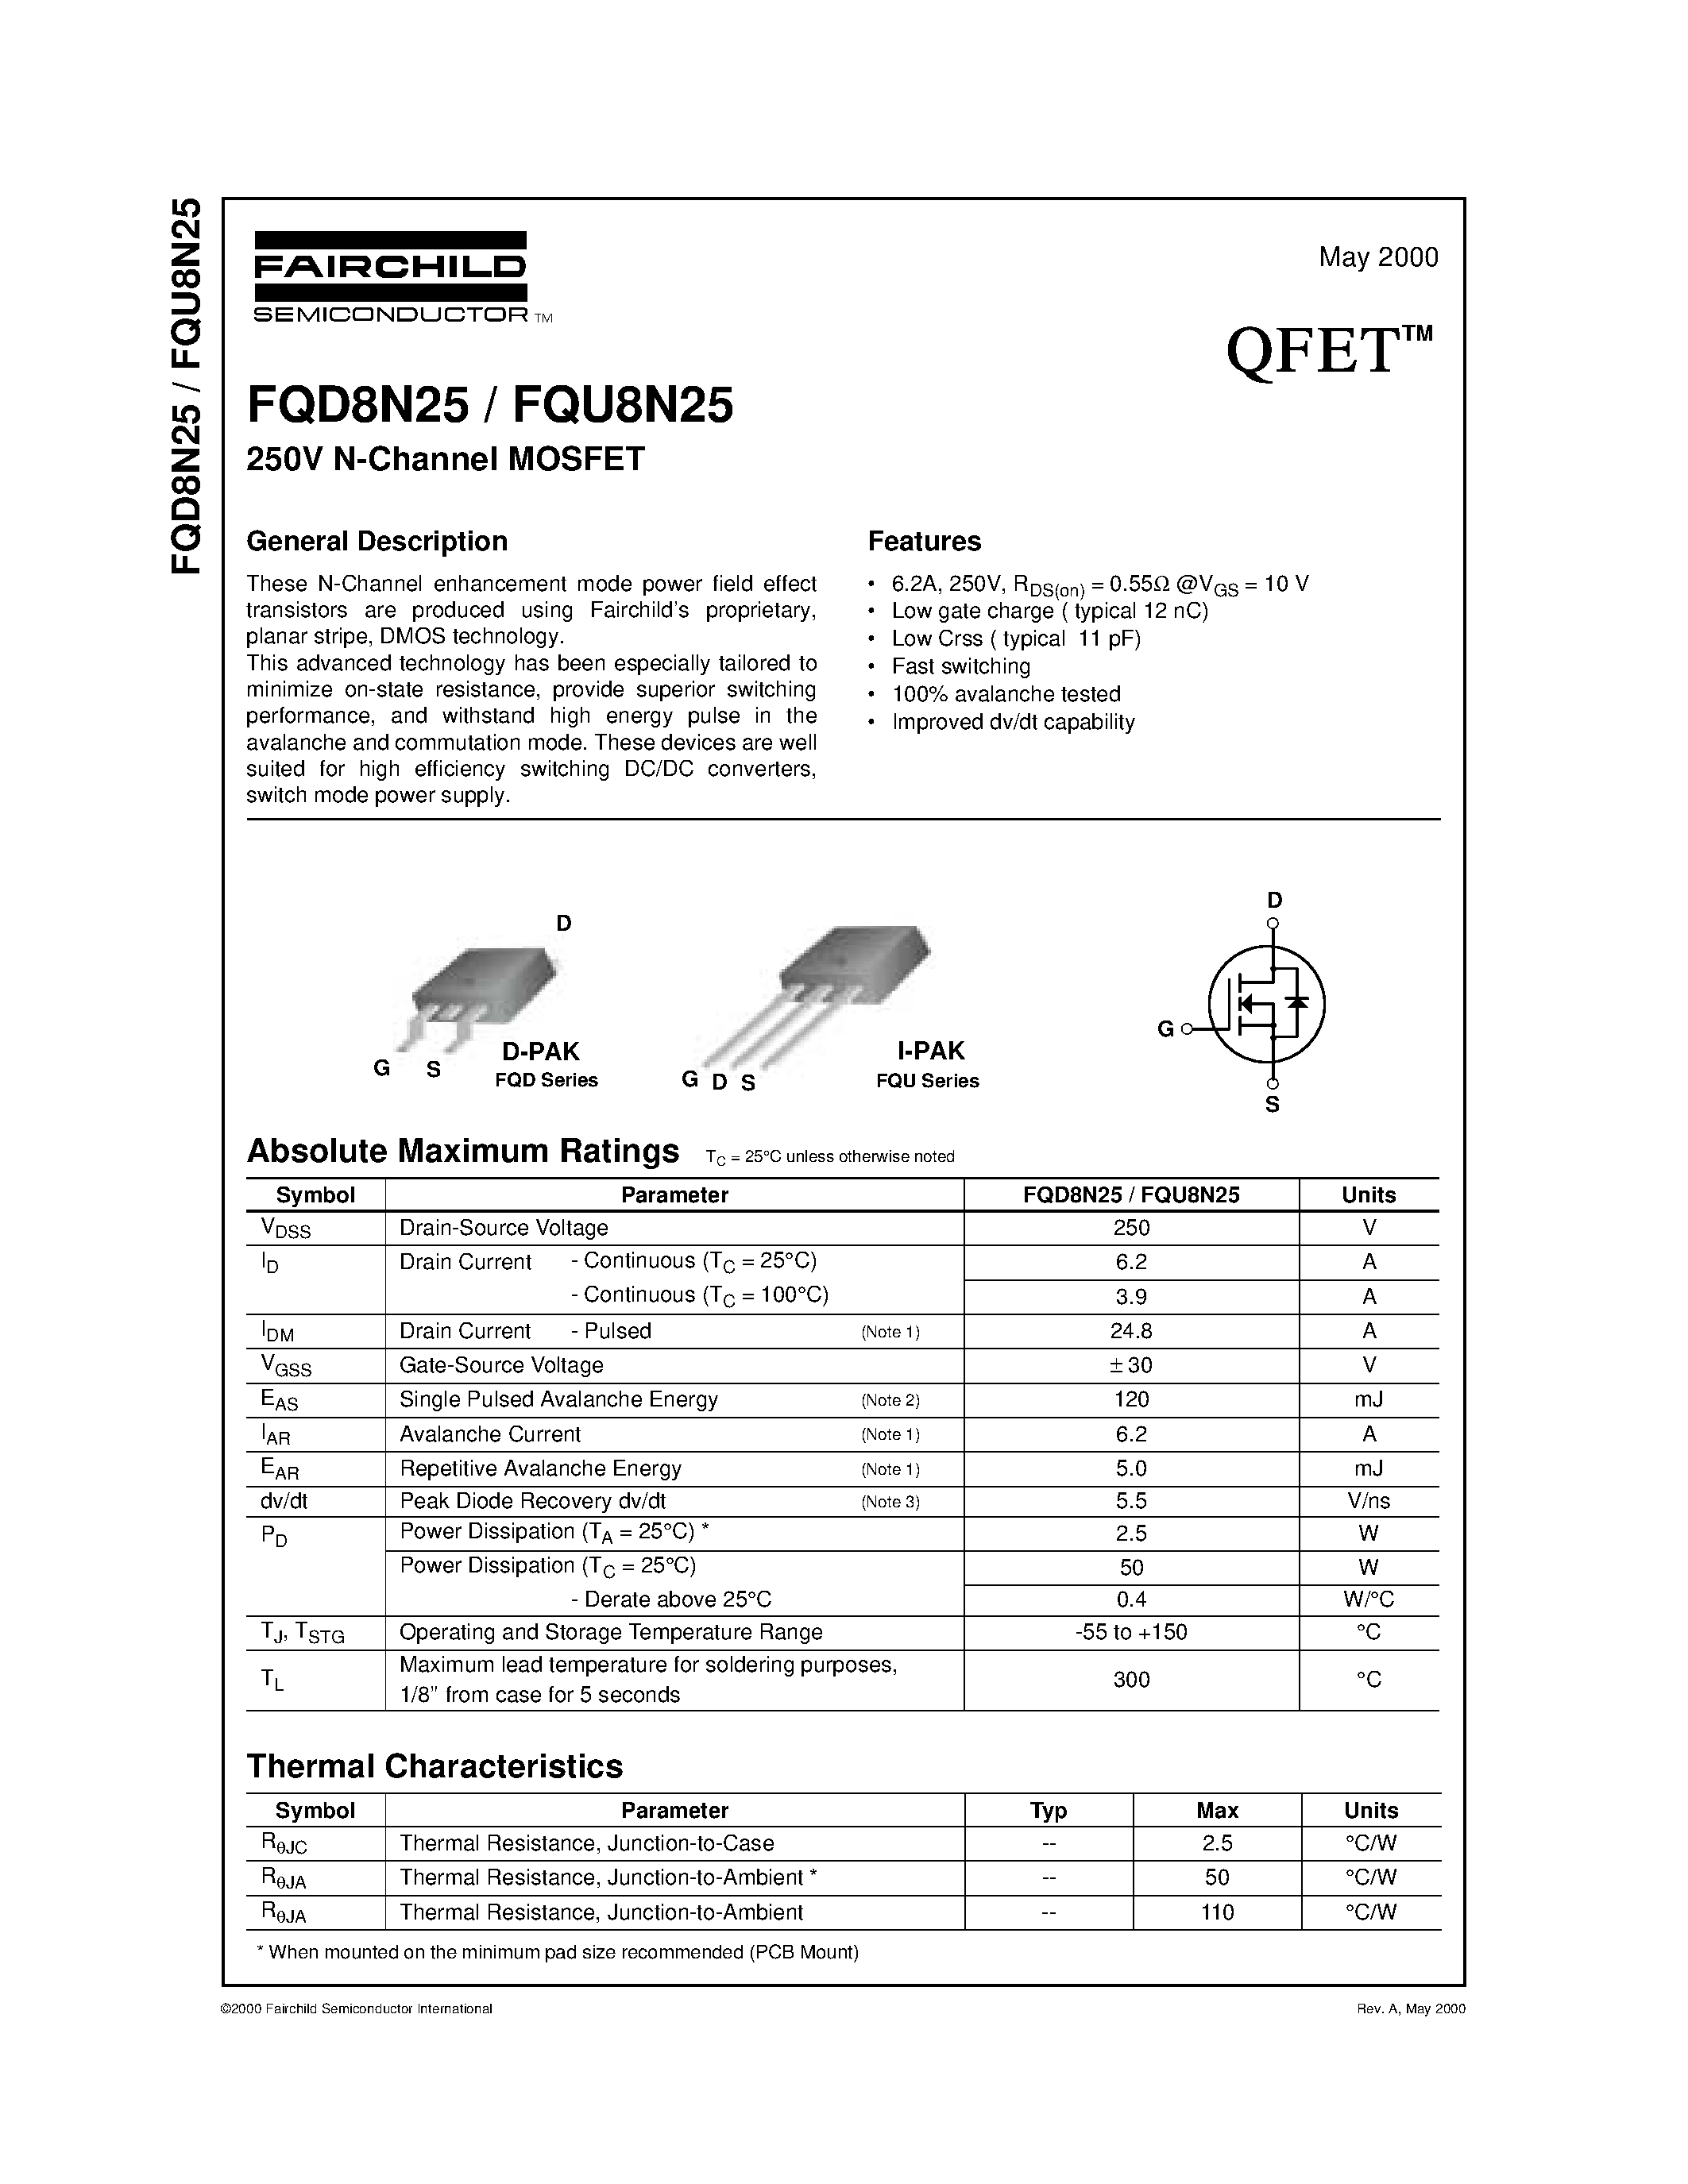 Datasheet FQD8N25 - 250V N-Channel MOSFET page 1